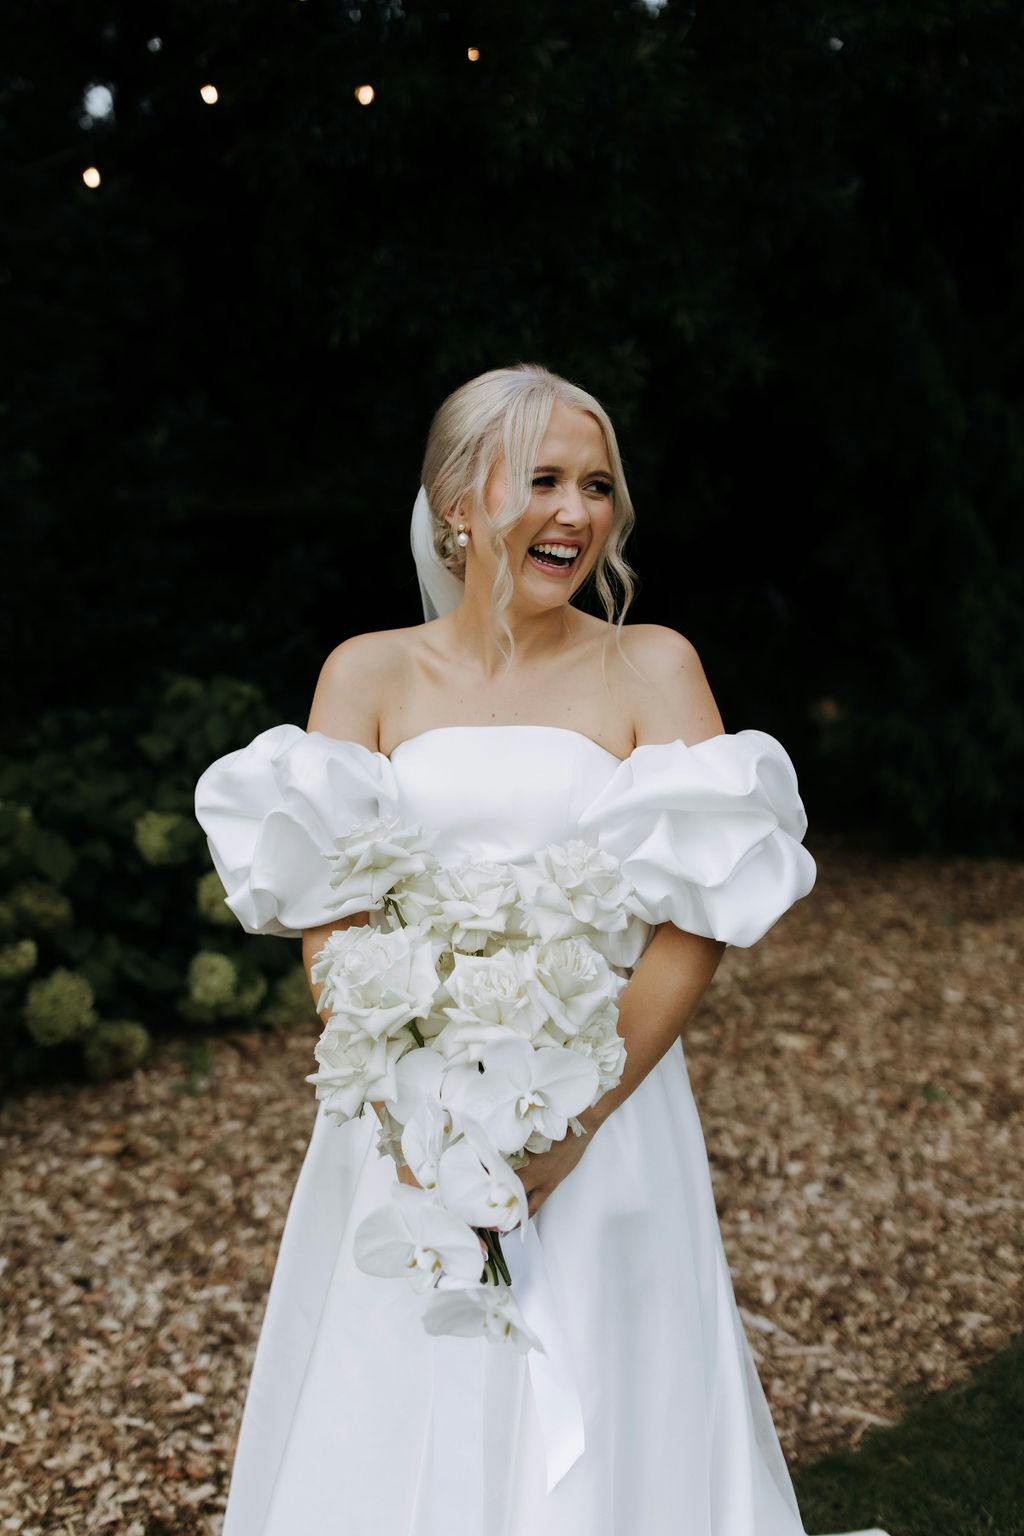 A bride with blonde hair styled in loose waves stands outdoors, smiling brightly. She wears an off-the-shoulder white wedding dress with puffed sleeves and holds a bouquet of white flowers. Behind her, there is greenery and a natural, rustic ground cover of wood chips.